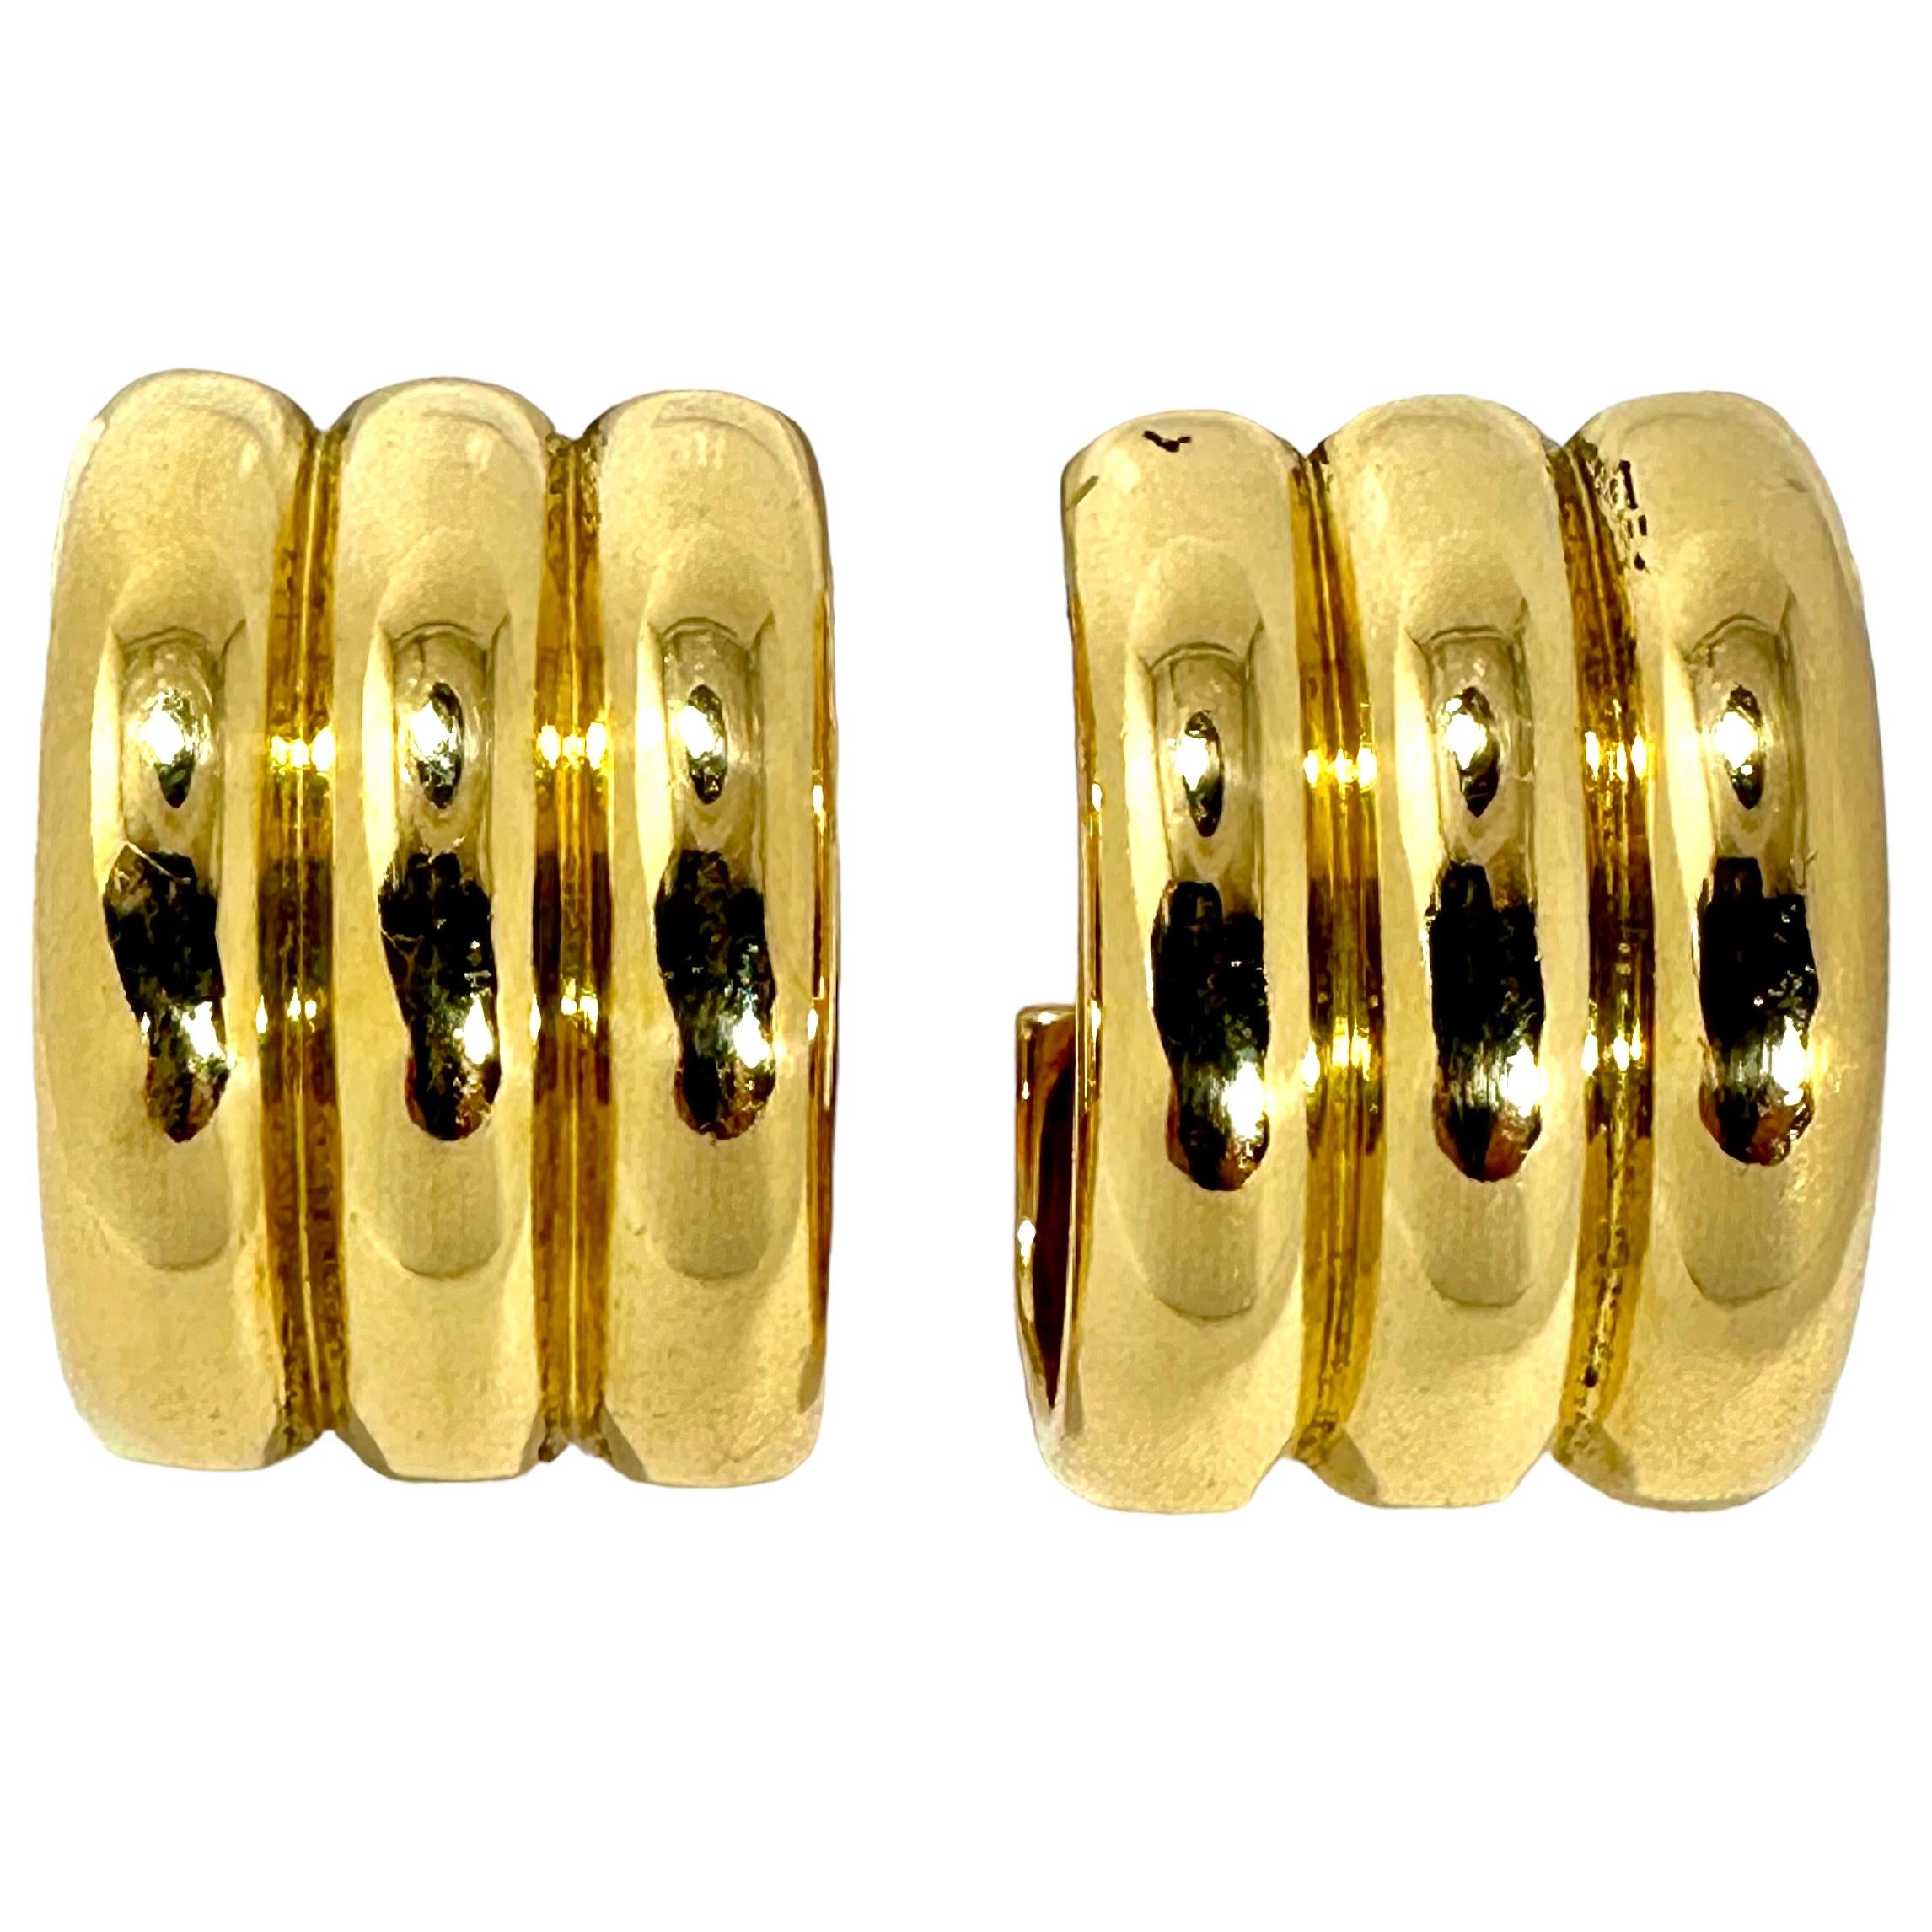 This bold and striking pair of 18k yellow gold French Cartier wide, hoop earrings are designed as three long bombe lines of melon fluted gold. 
This tailored, crisp look is great for everyday wear. With dimensions of 1 inch in length by a width of